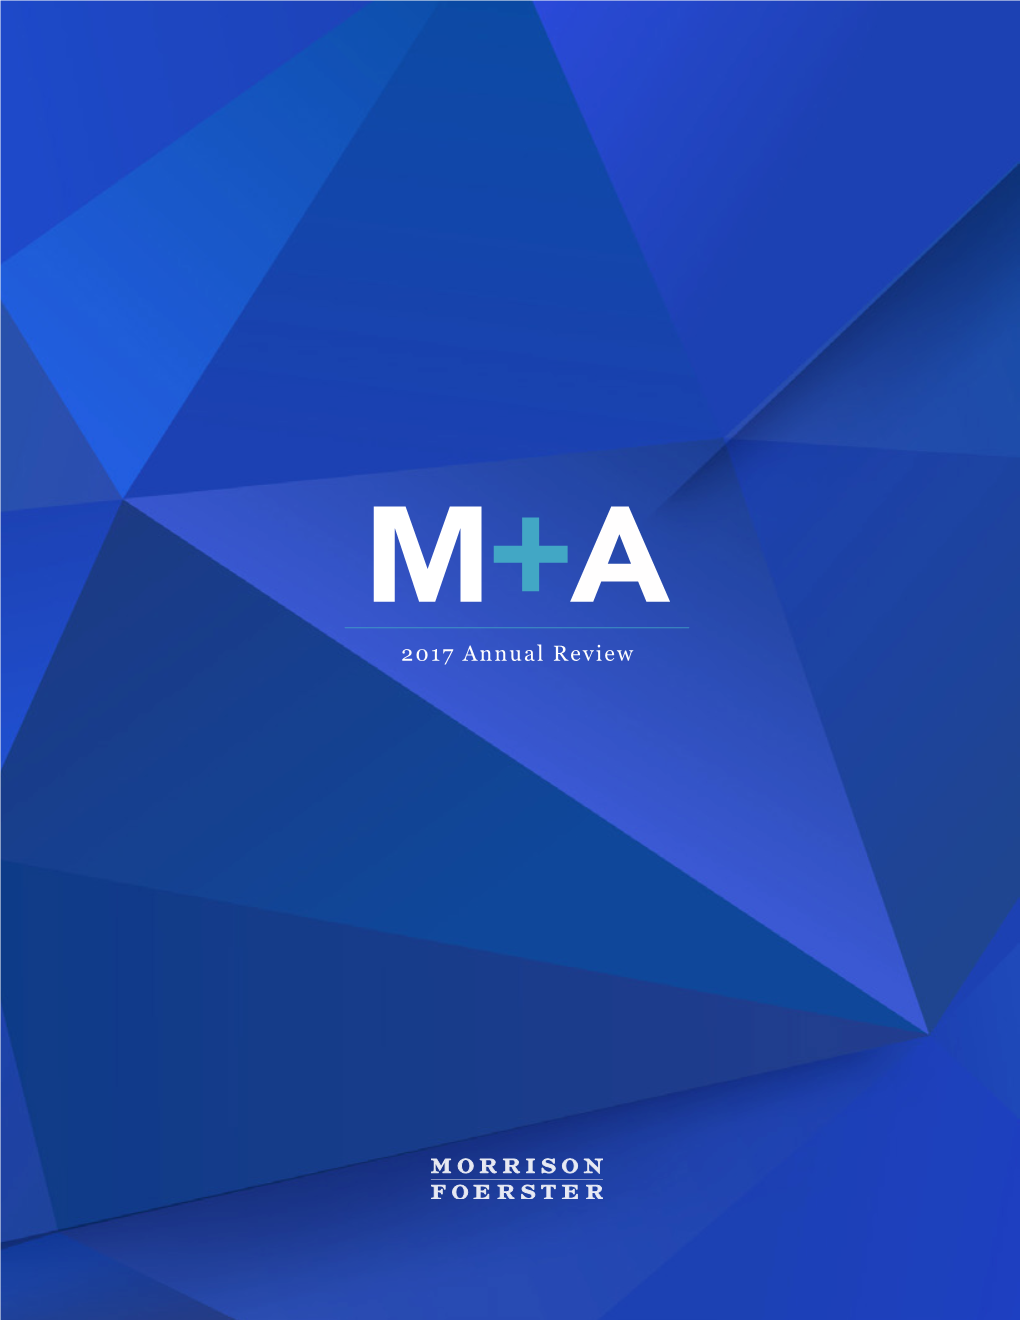 M+A 2017 Annual Review